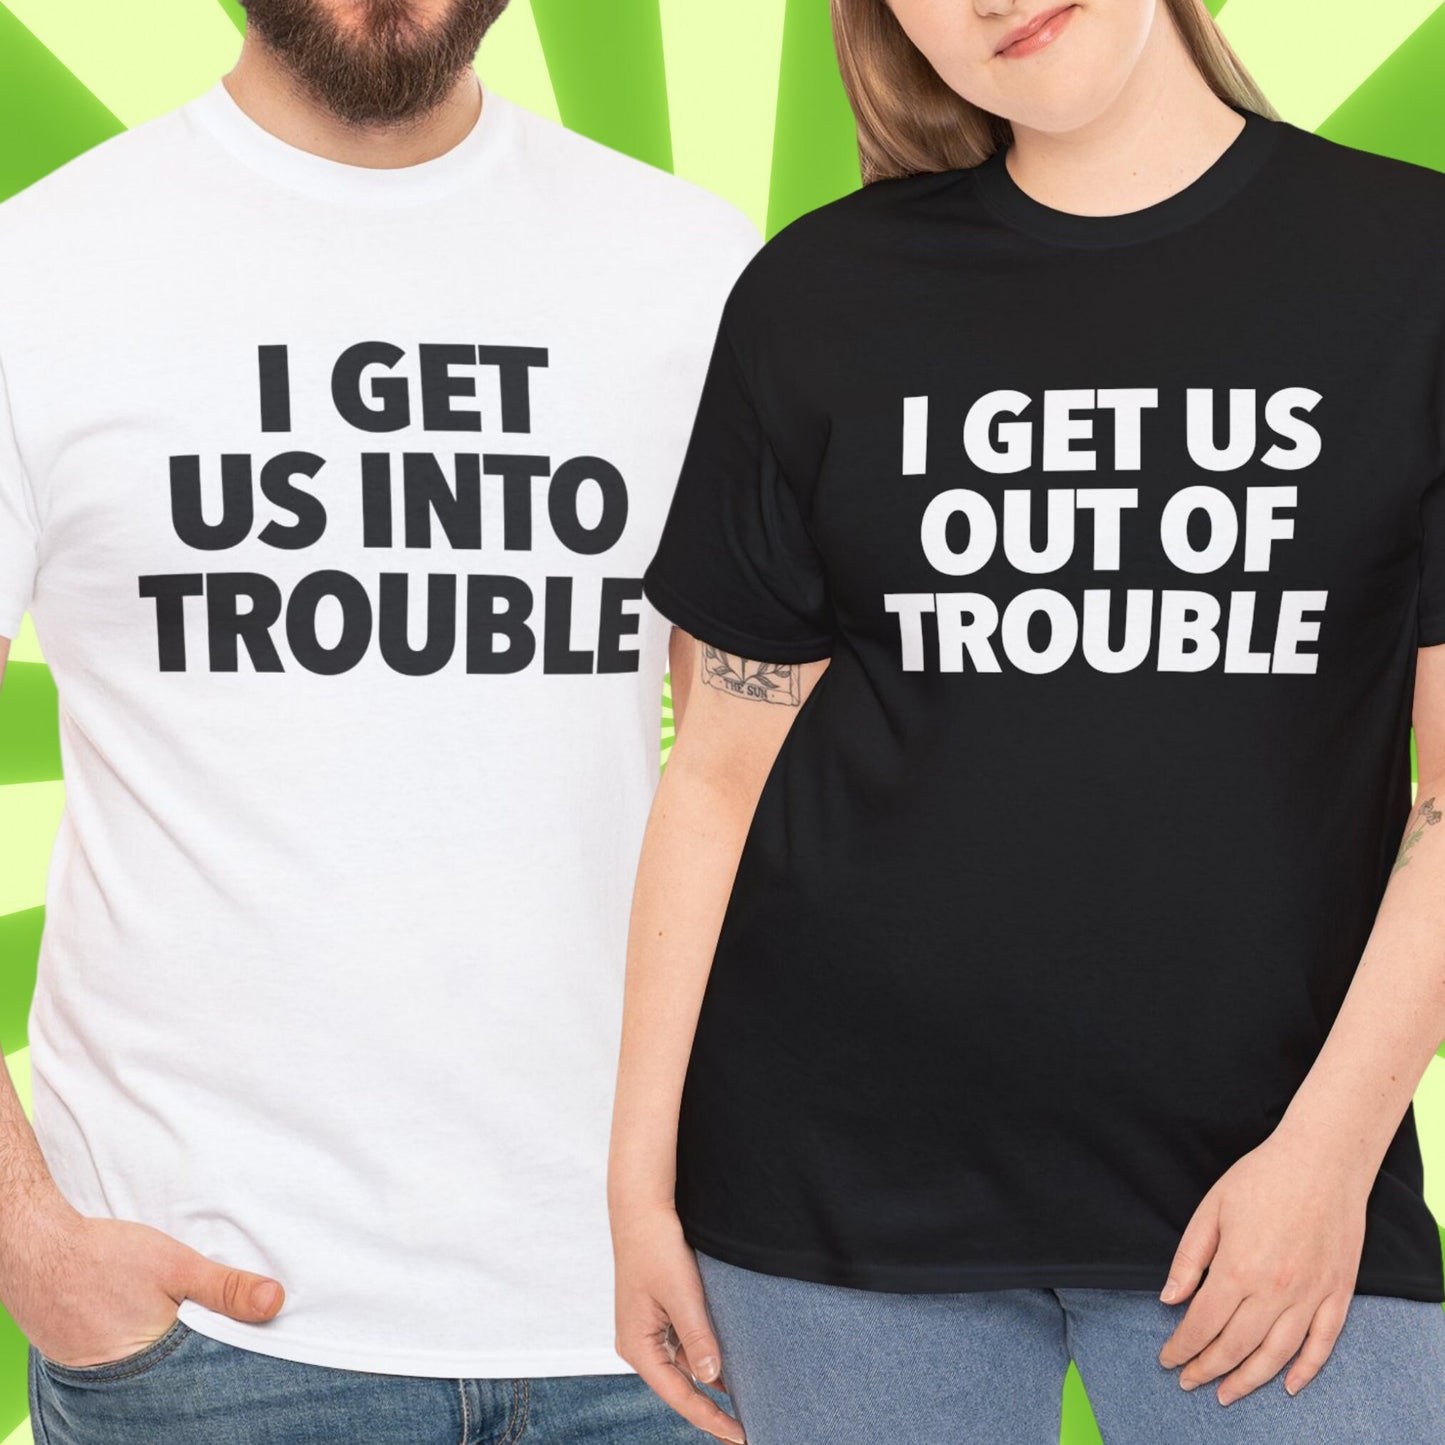 I Get Us Into/Out of Trouble | Bestfriend, Couple, Sister Matching Shirt